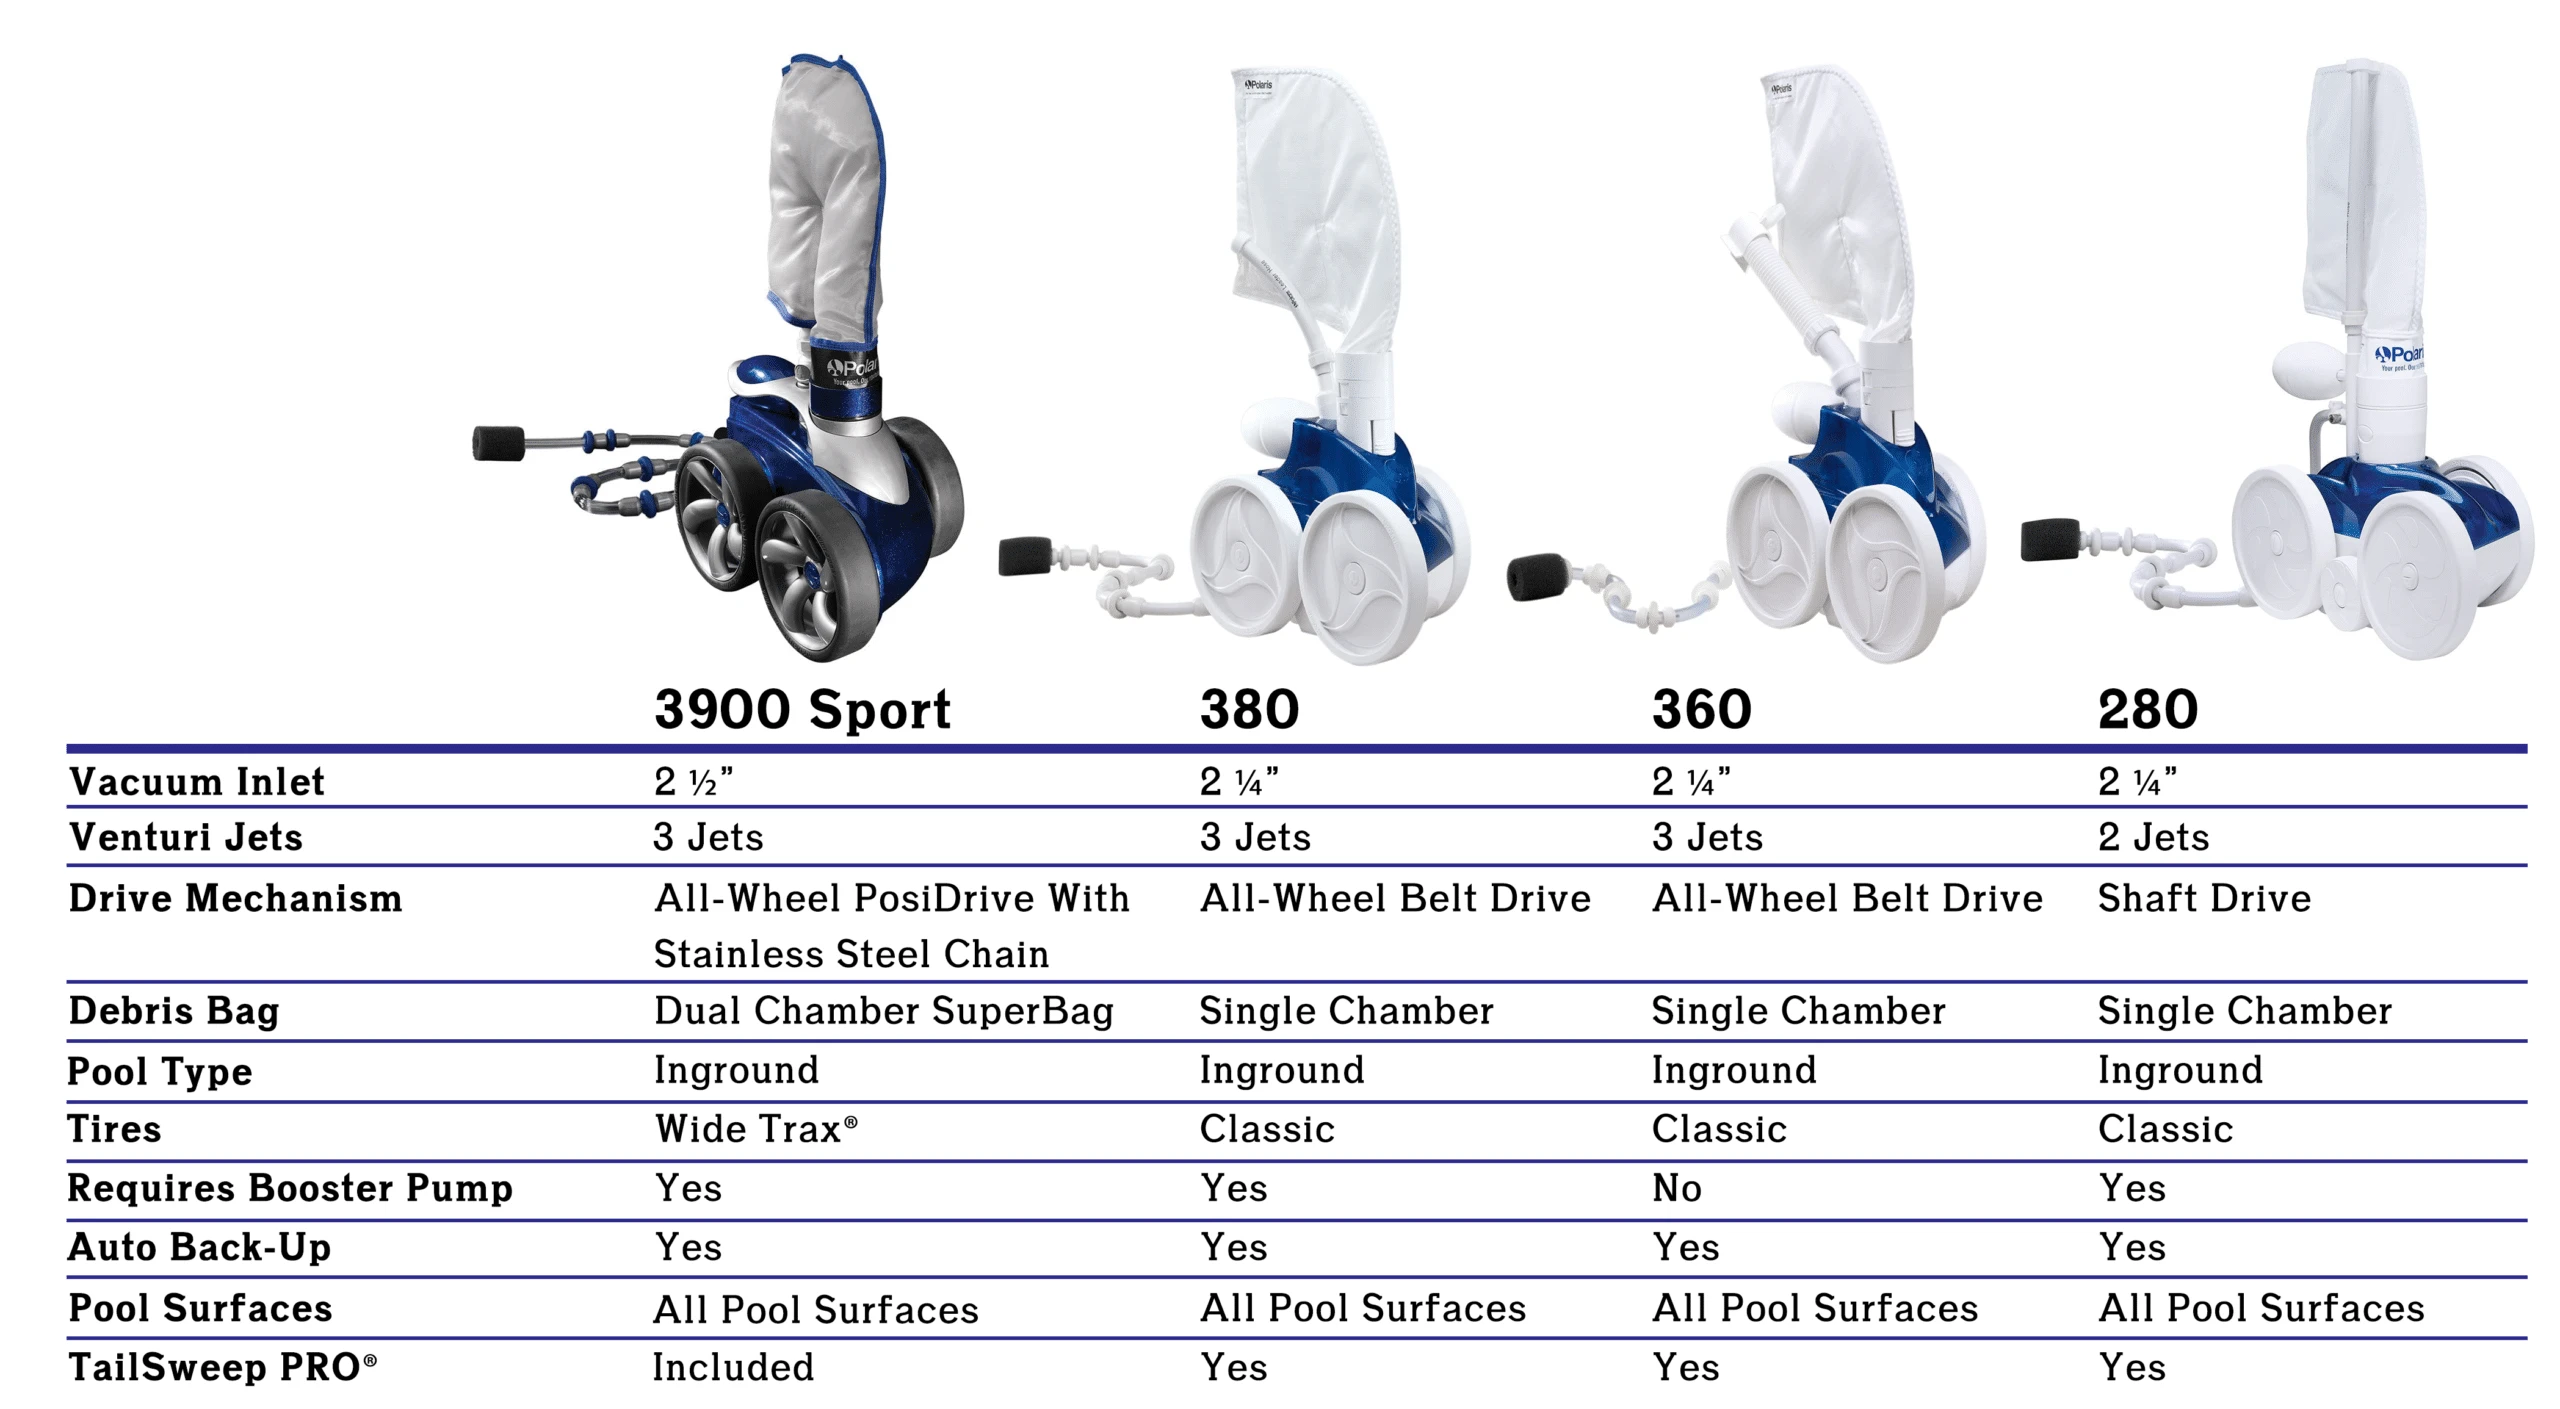 Polaris-280-side-pool-cleaner-comparison-chart---small